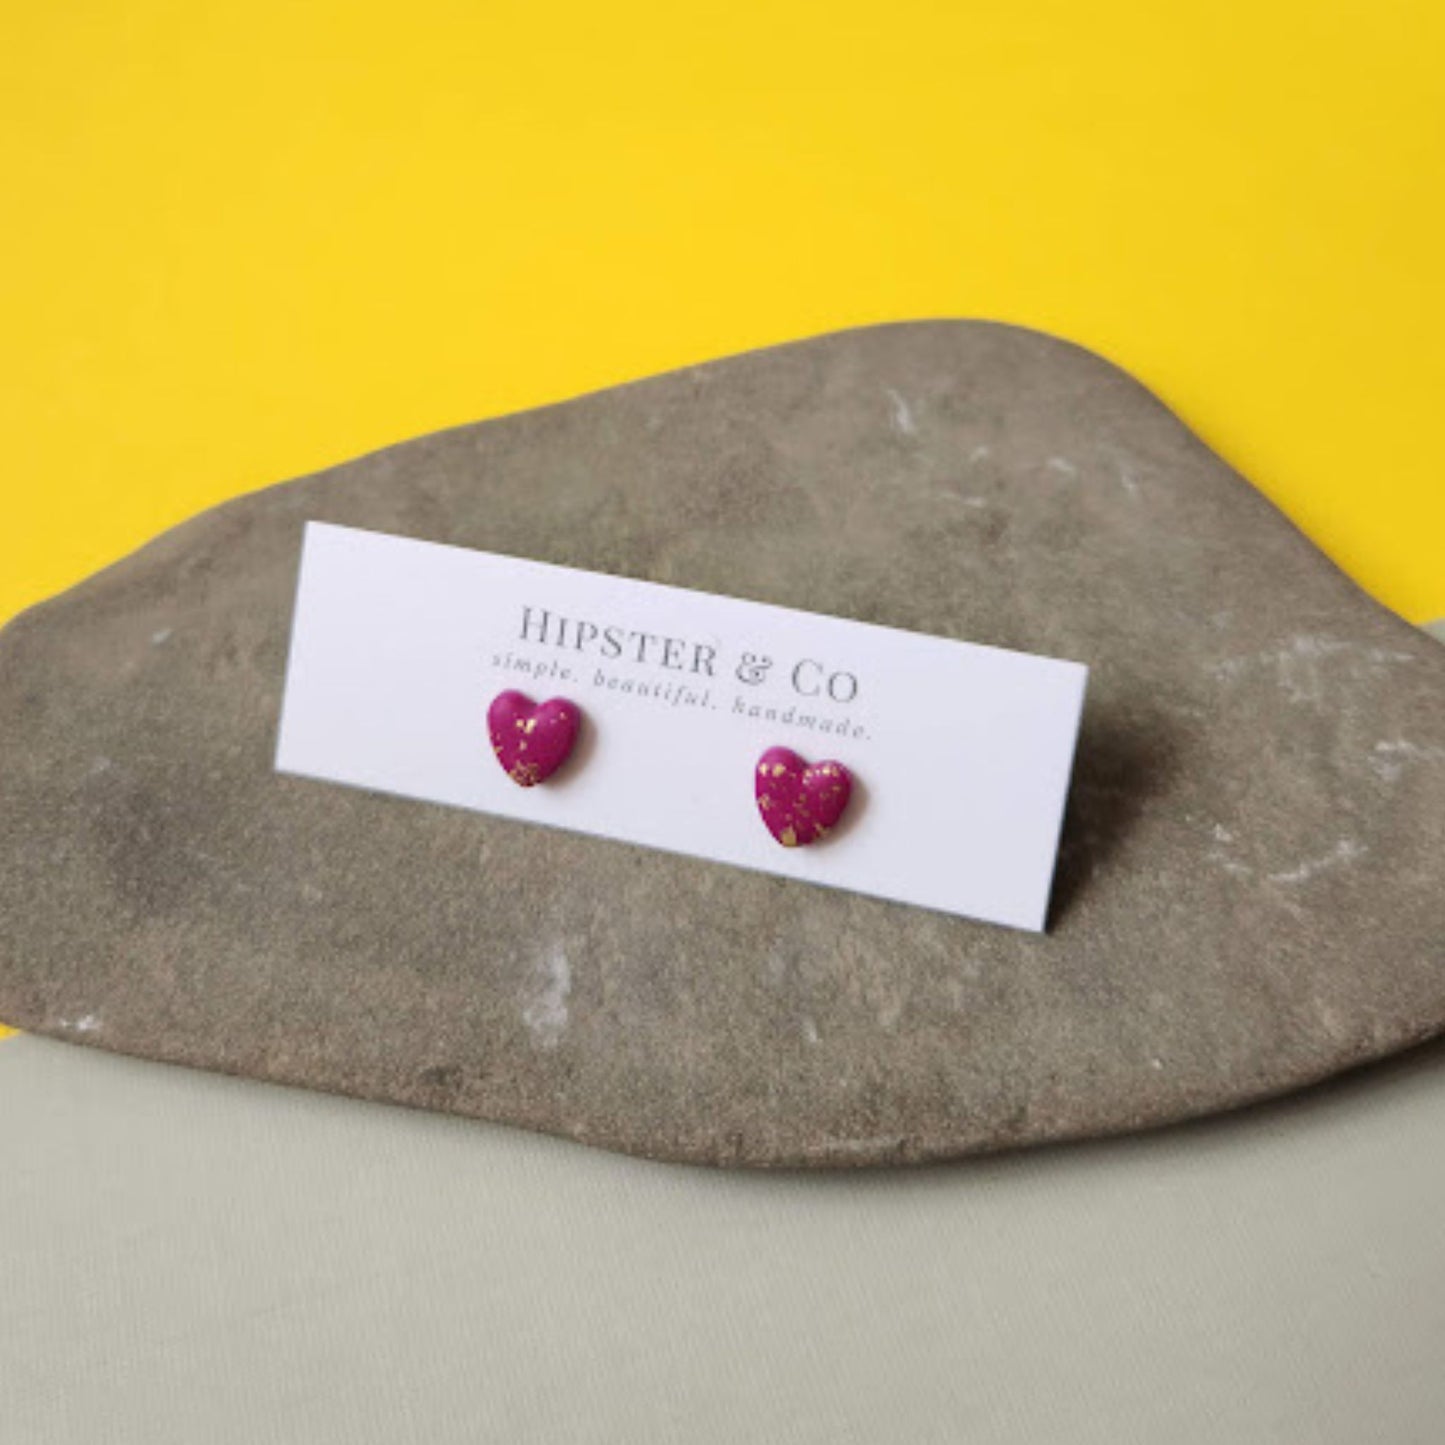 The Brielle Heart Shaped Fuchsia and Gold Polymer Clay Stud Earrings